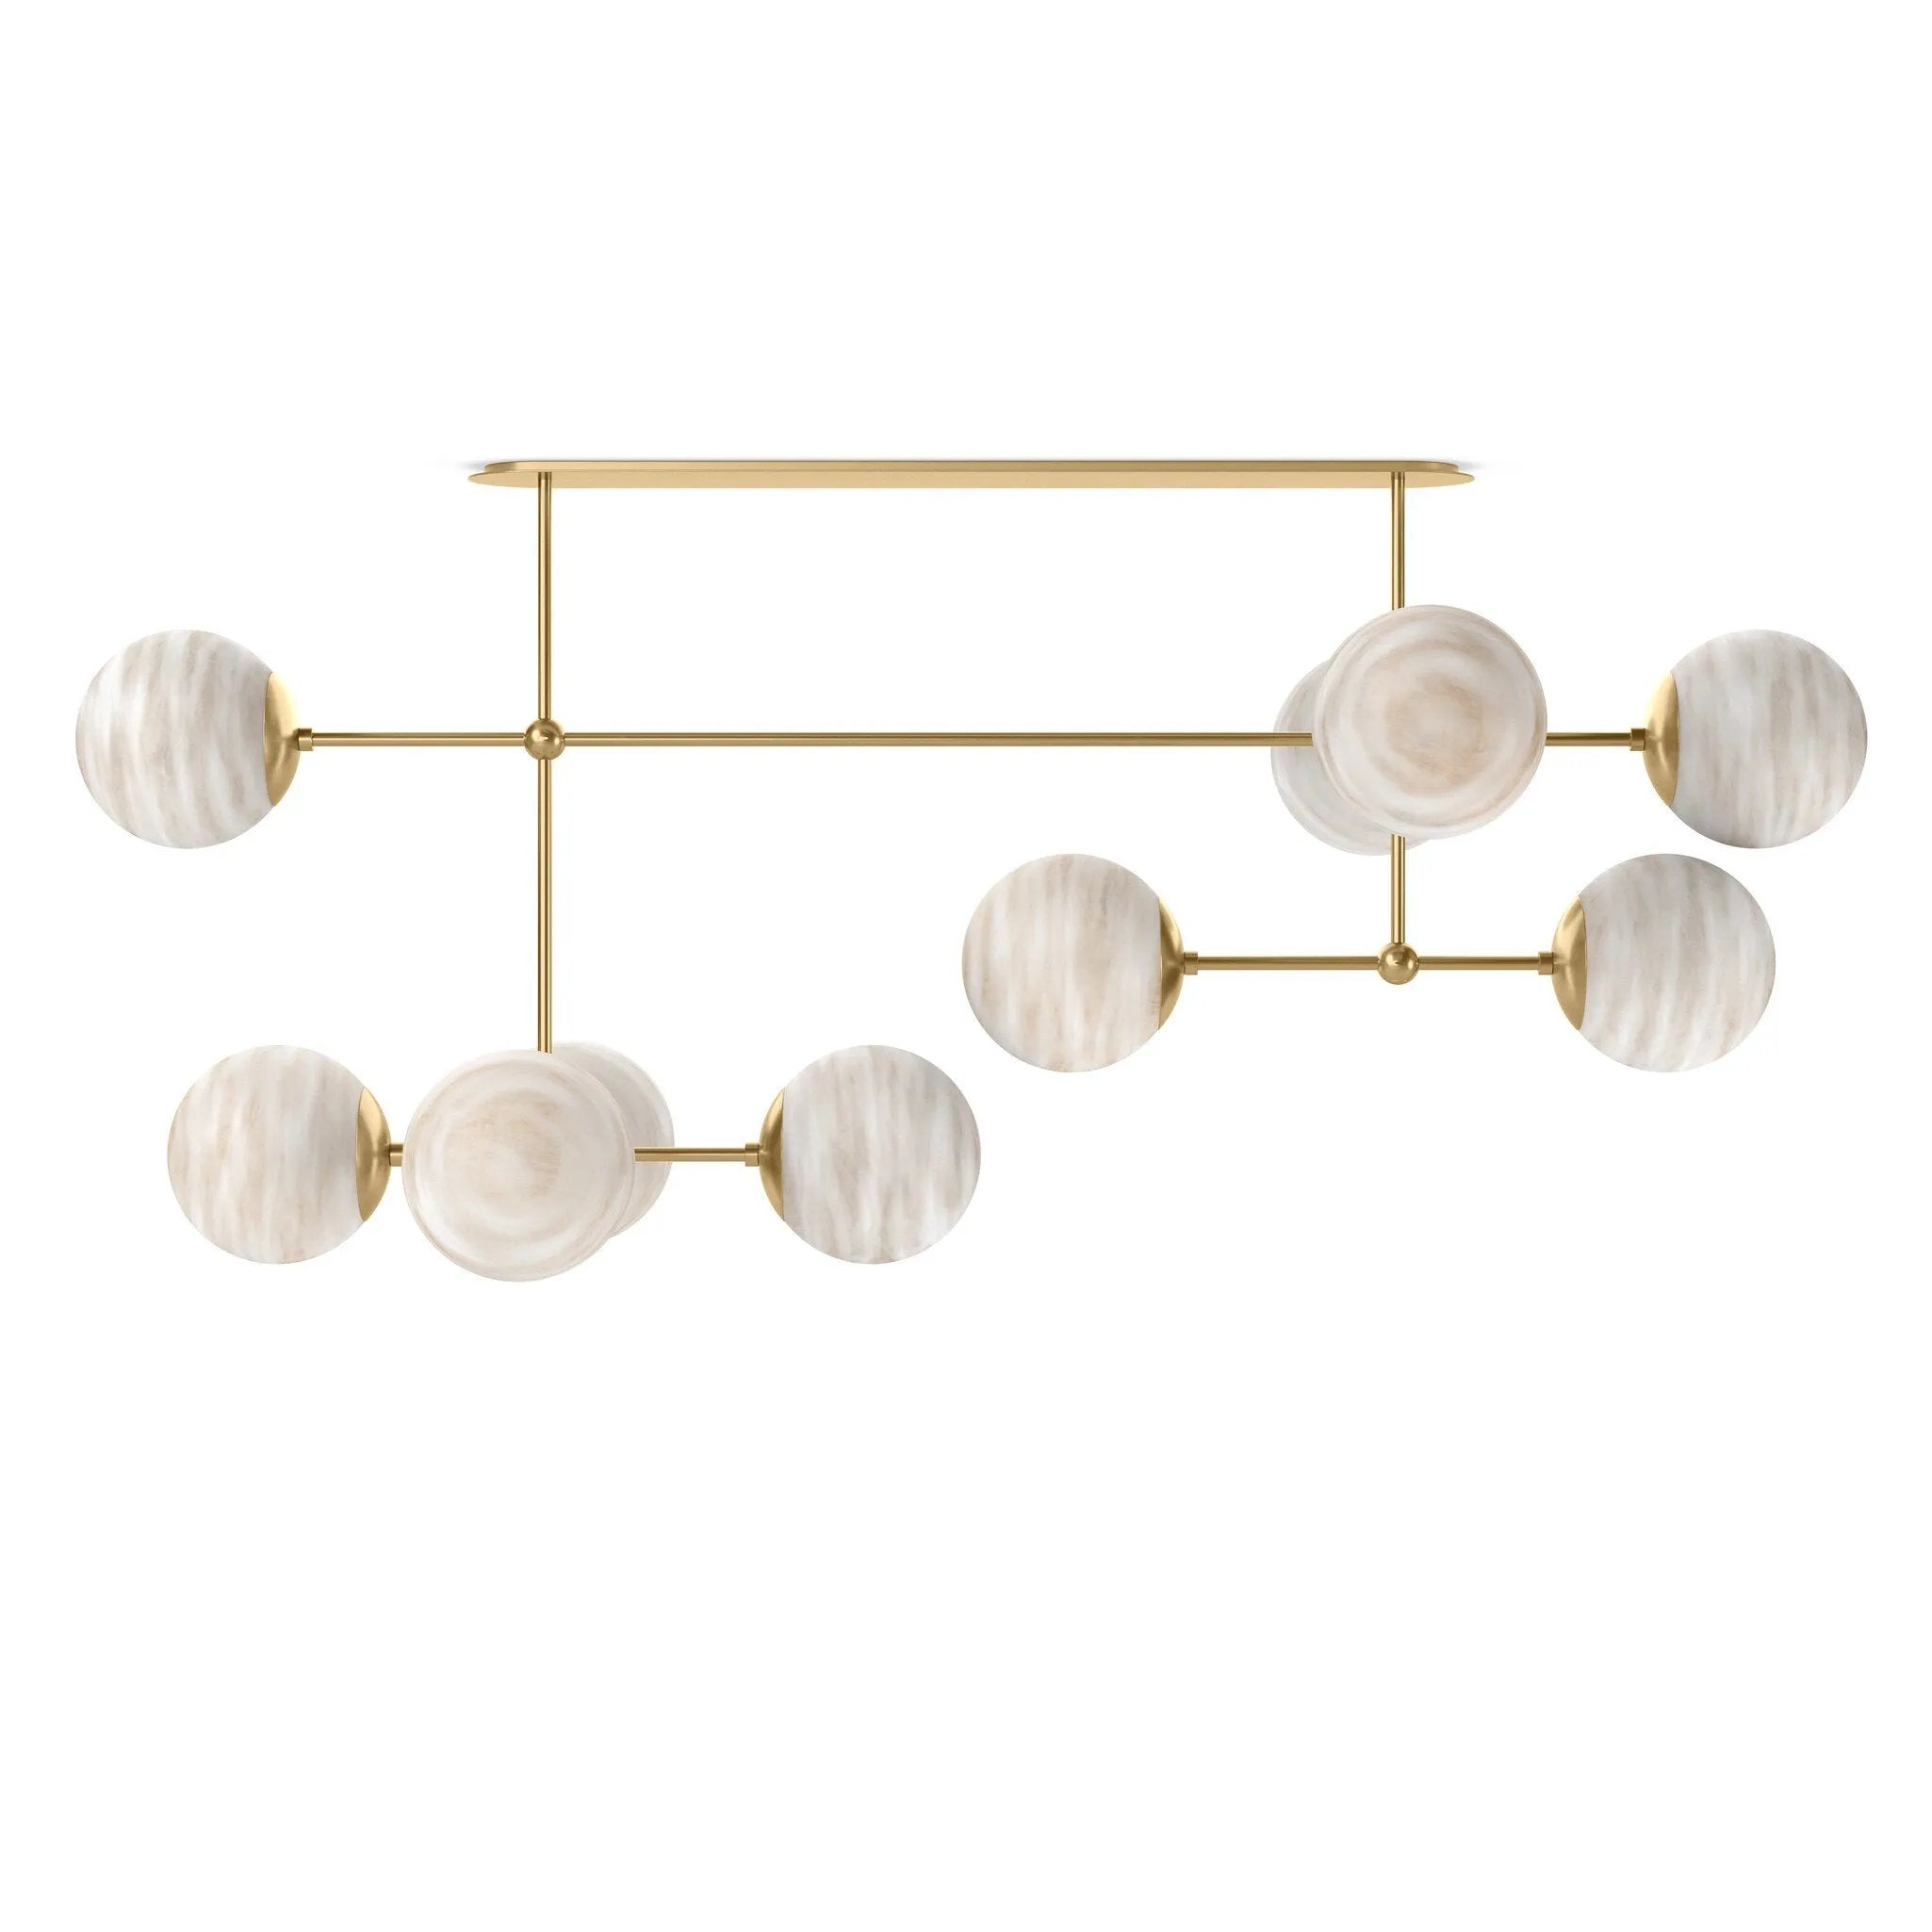 Marbled glass spheres seem to extend and reach across smooth brass rods. Each globe is individually blown, shaped and sculpted by hand through a one-hour process. Brass and glass are 98% recyclable. Designed and sustainably made in Poland by Schwung.Overall Dimensions64.25"w x 30.25"d x 28.75"hFull Details &amp; SpecificationsTear Shee Amethyst Home provides interior design, new home construction design consulting, vintage area rugs, and lighting in the Omaha metro area.